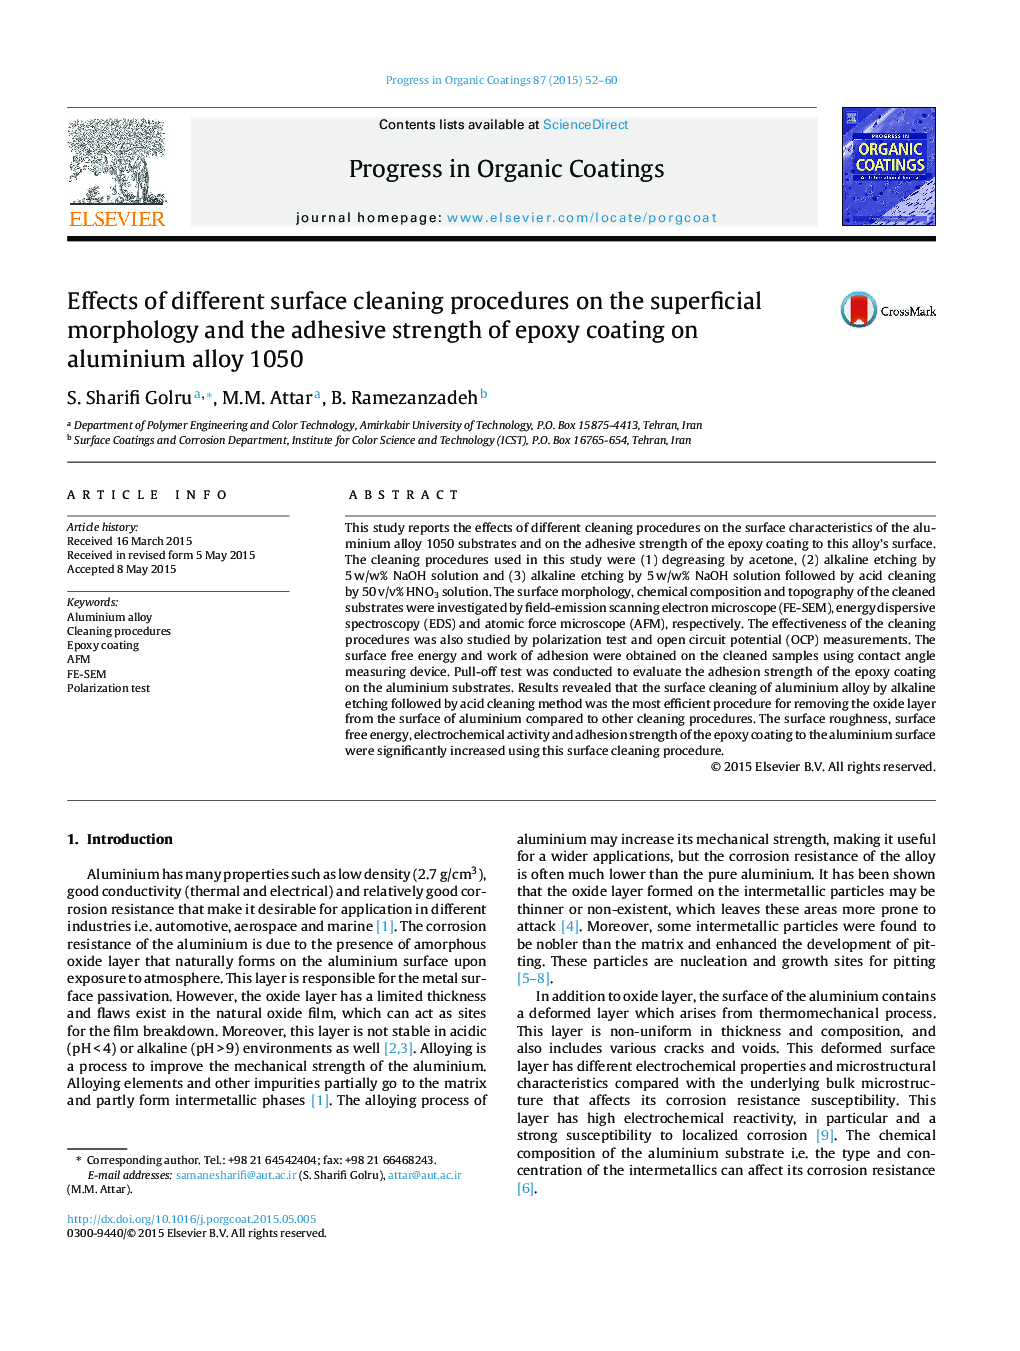 Effects of different surface cleaning procedures on the superficial morphology and the adhesive strength of epoxy coating on aluminium alloy 1050